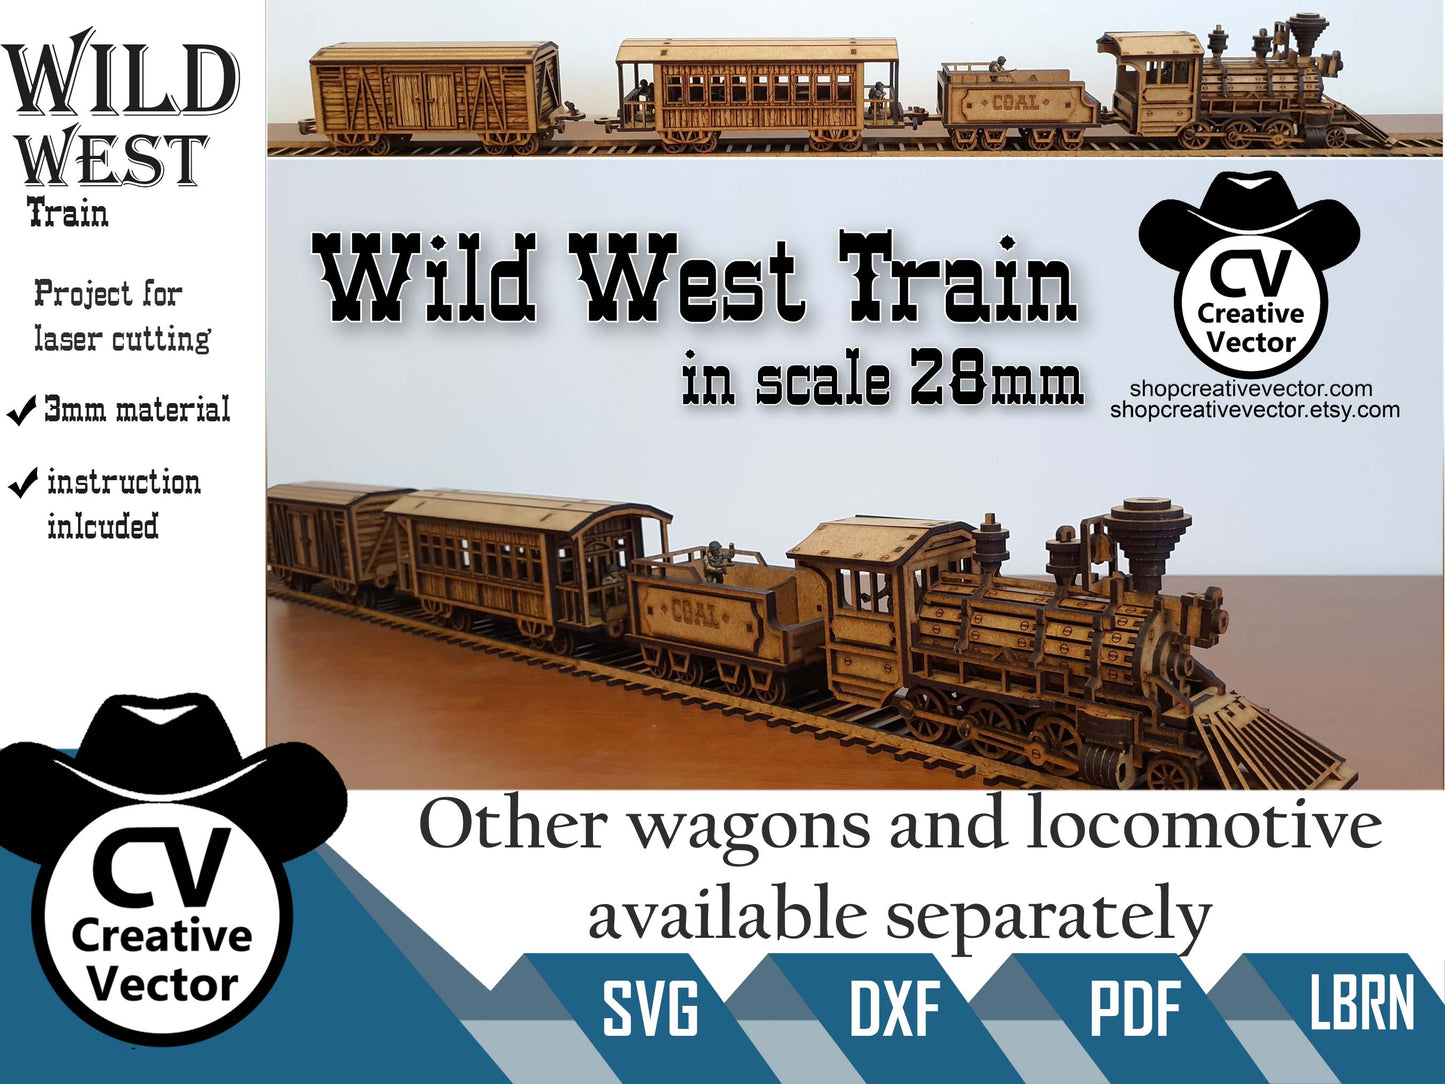 Wild West Locomotive with coal wagon + rails  in scale 28mm for Wargamers